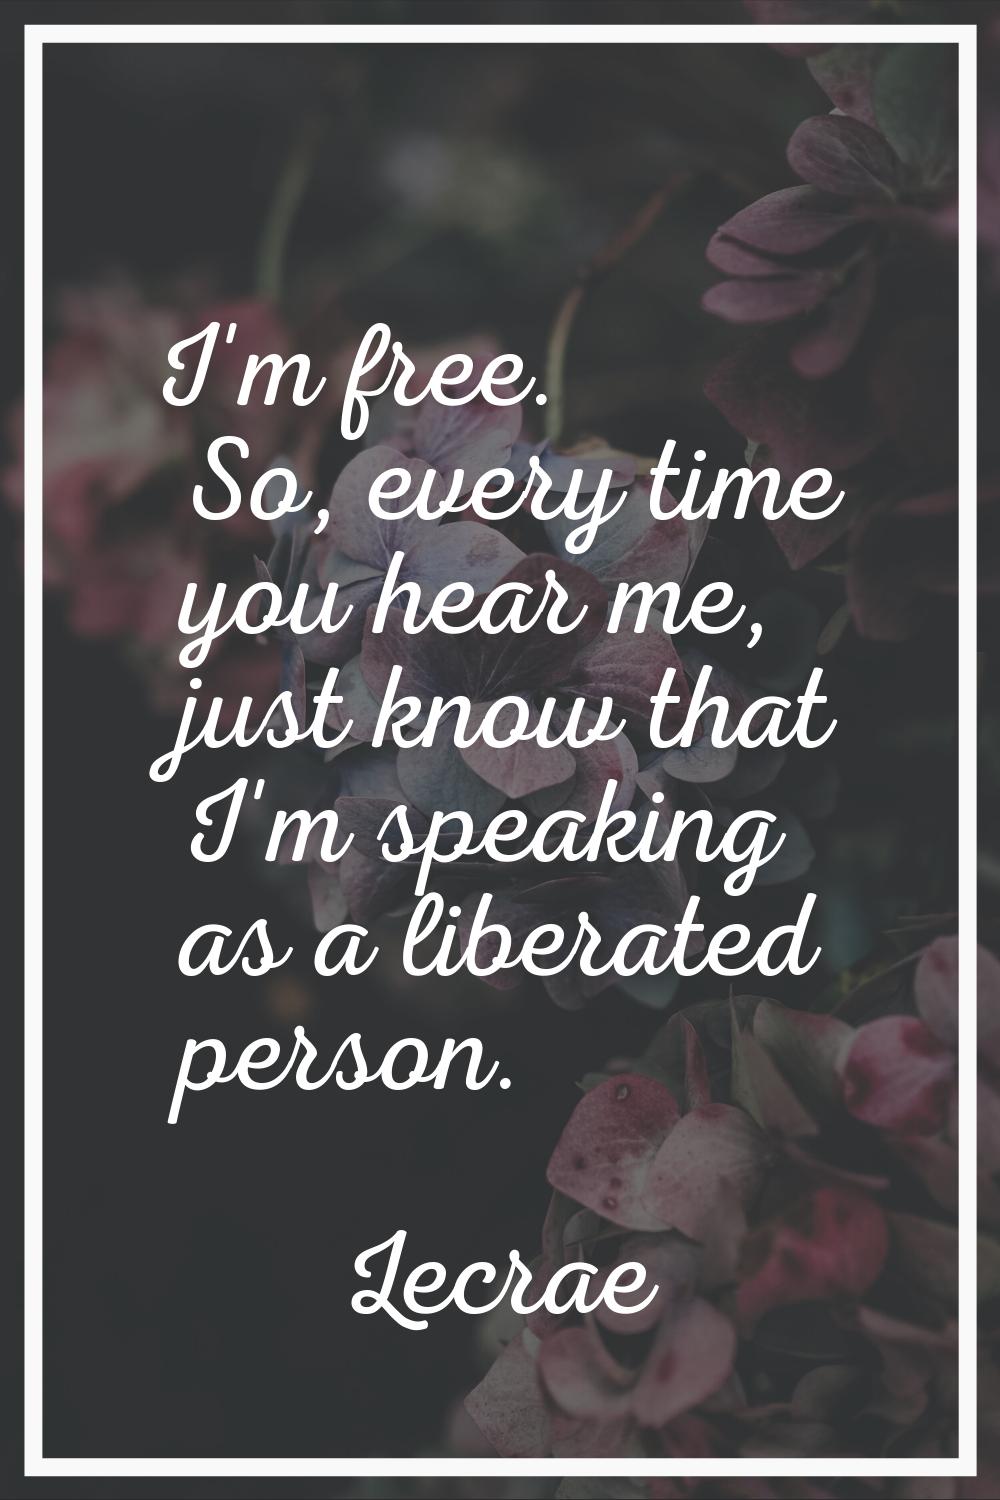 I'm free. So, every time you hear me, just know that I'm speaking as a liberated person.